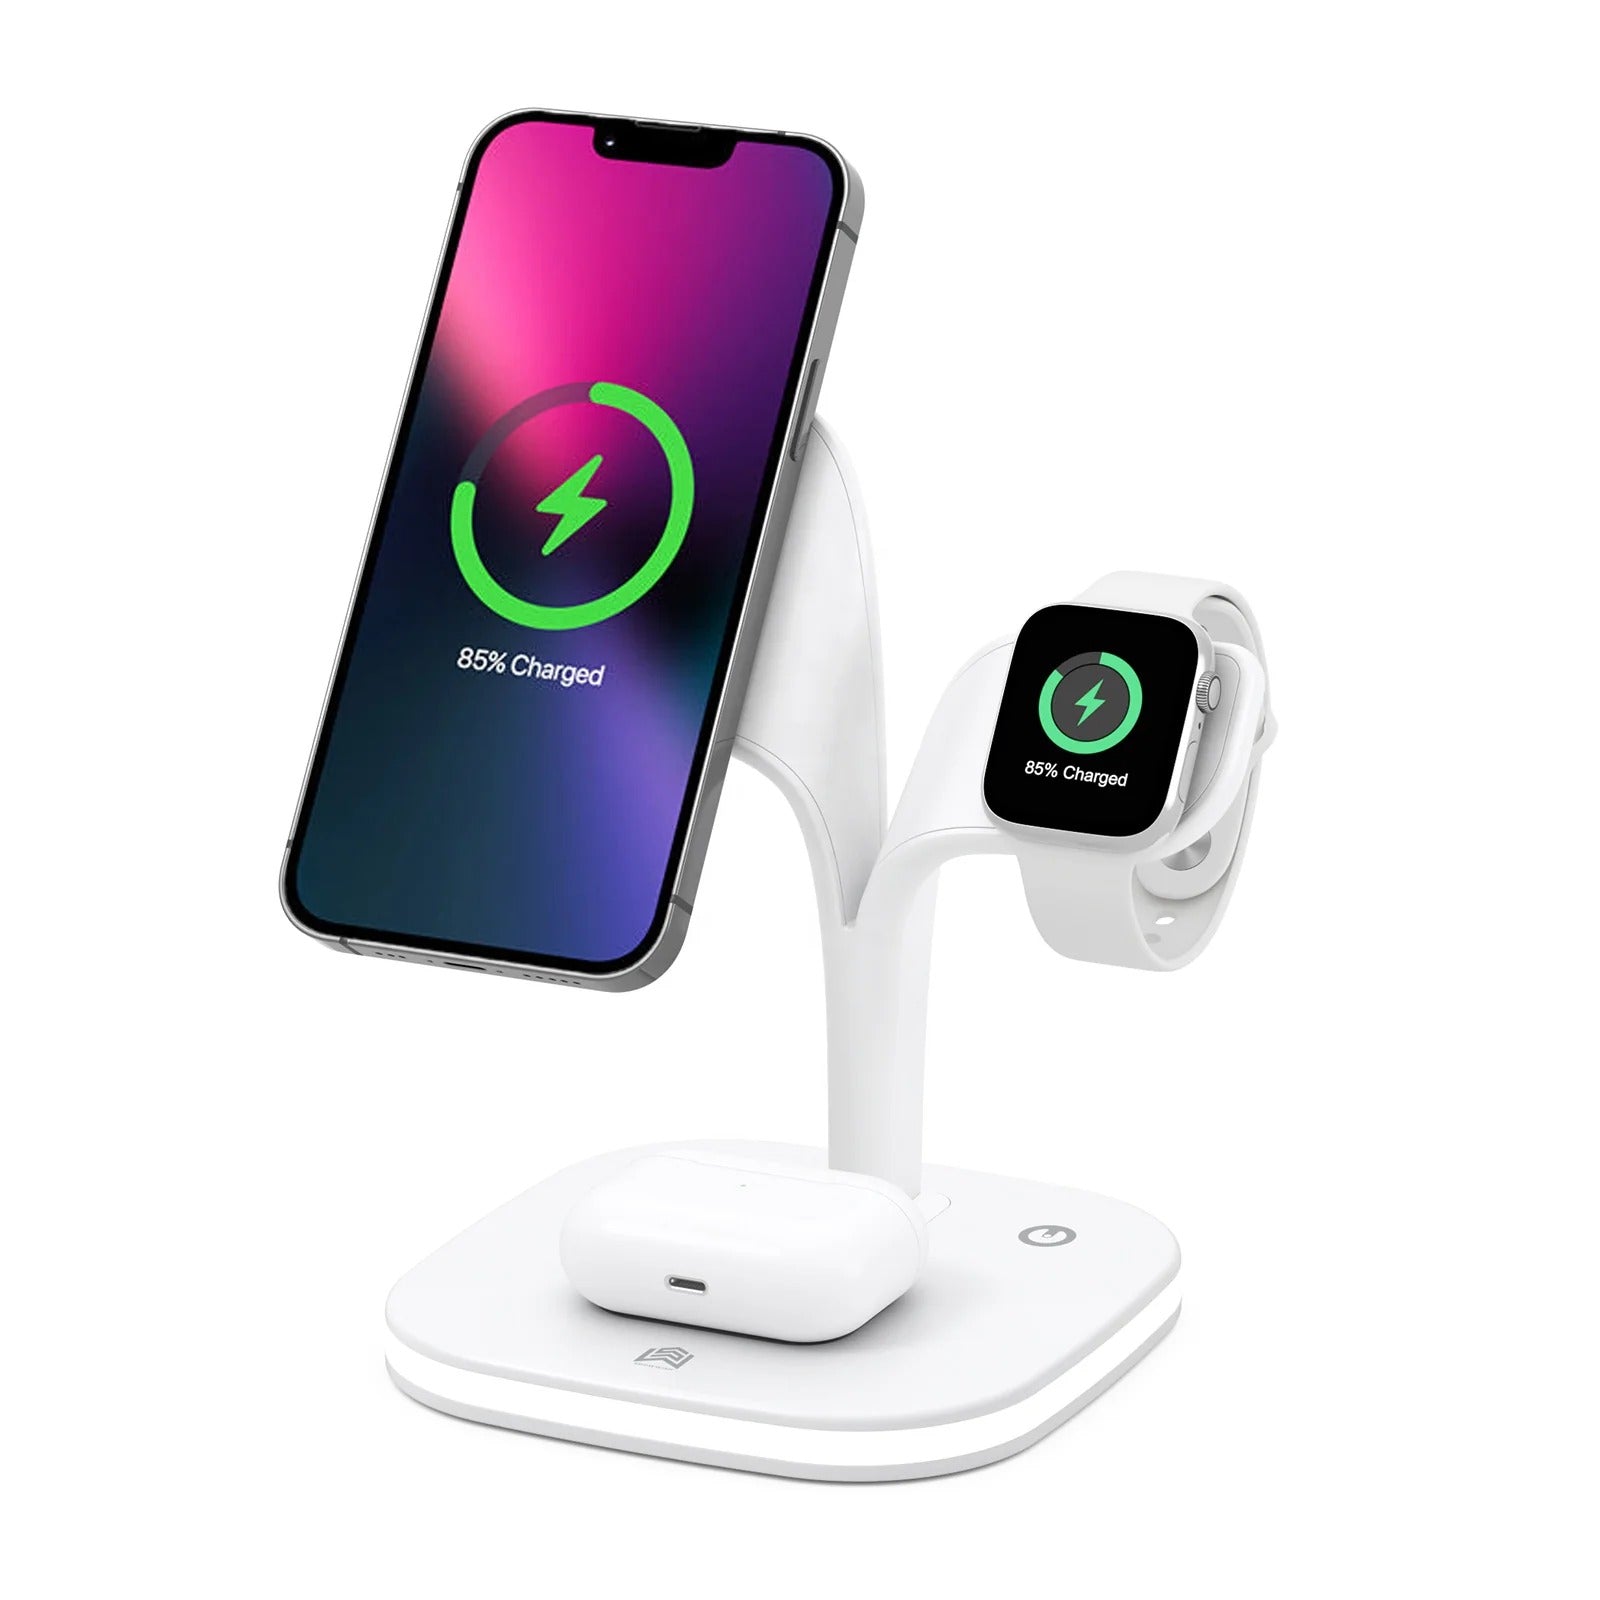 Bloom 5 in 1 Wireless Charging Station Three store